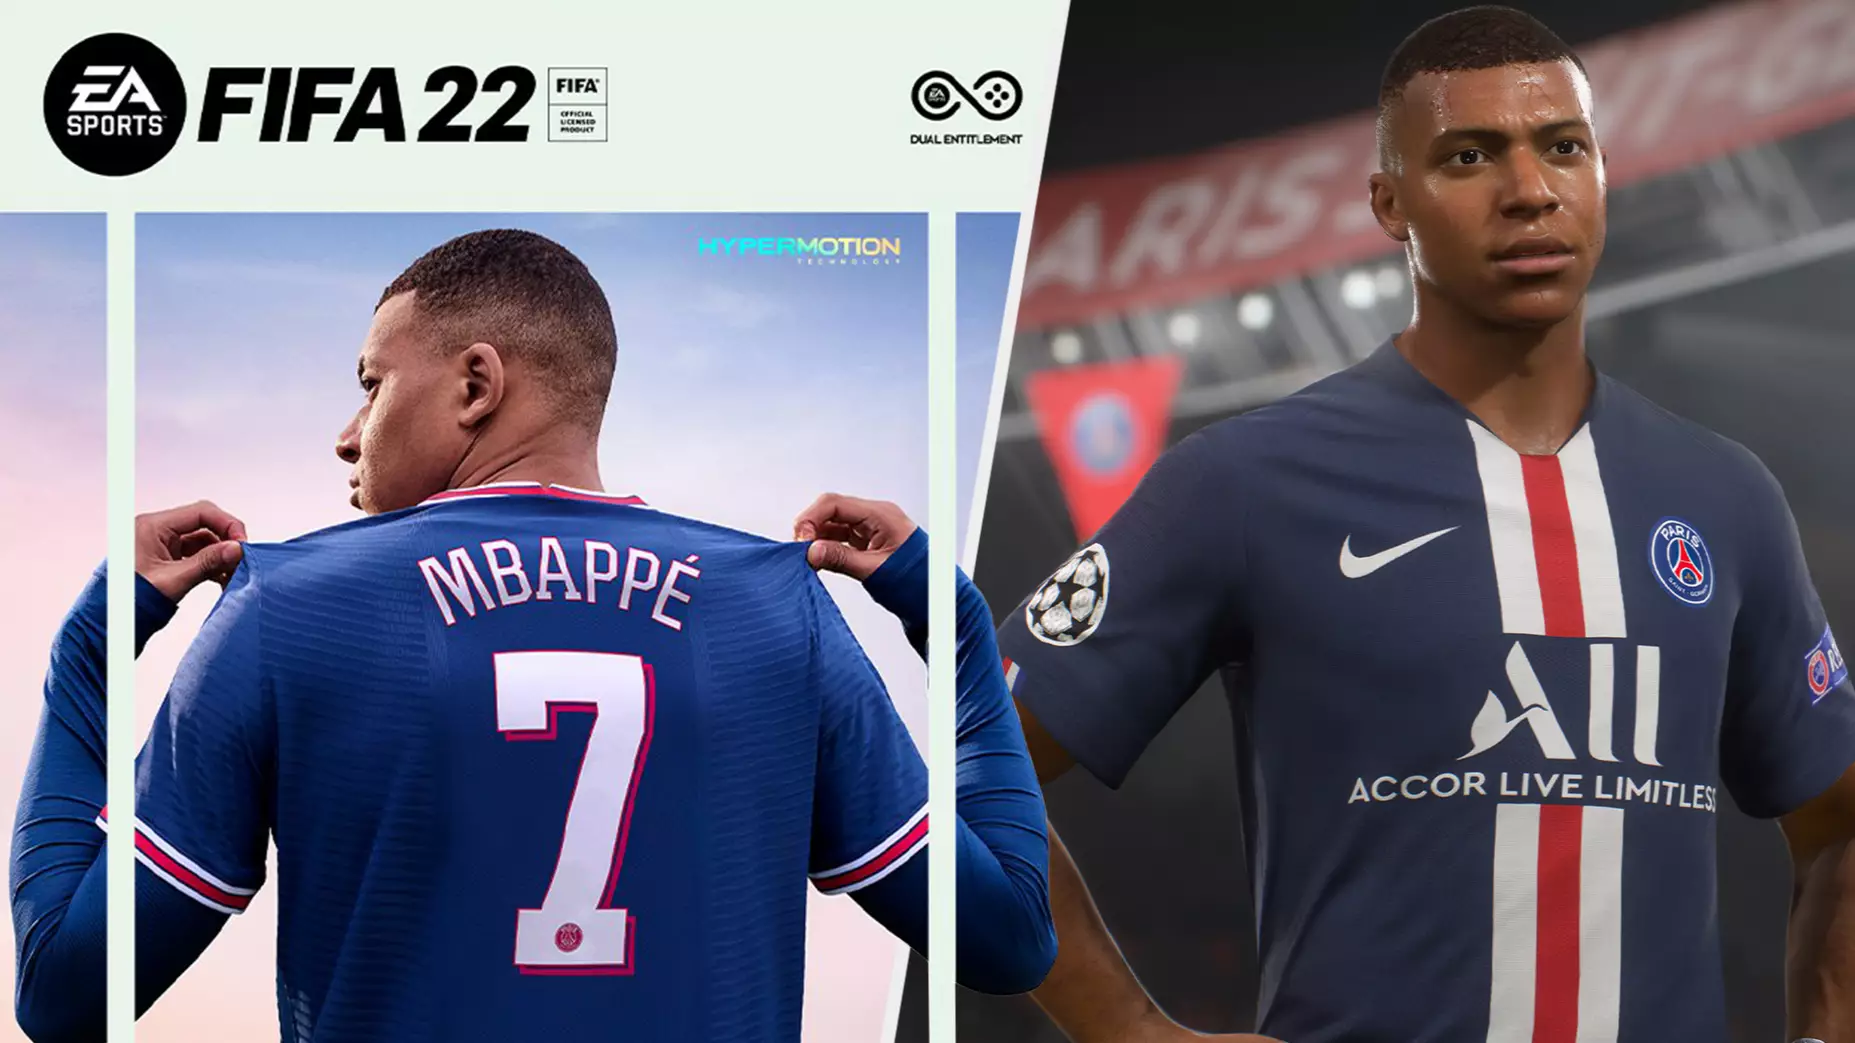 Kylian Mbappé Will Be The ‘FIFA 22’ Cover Star